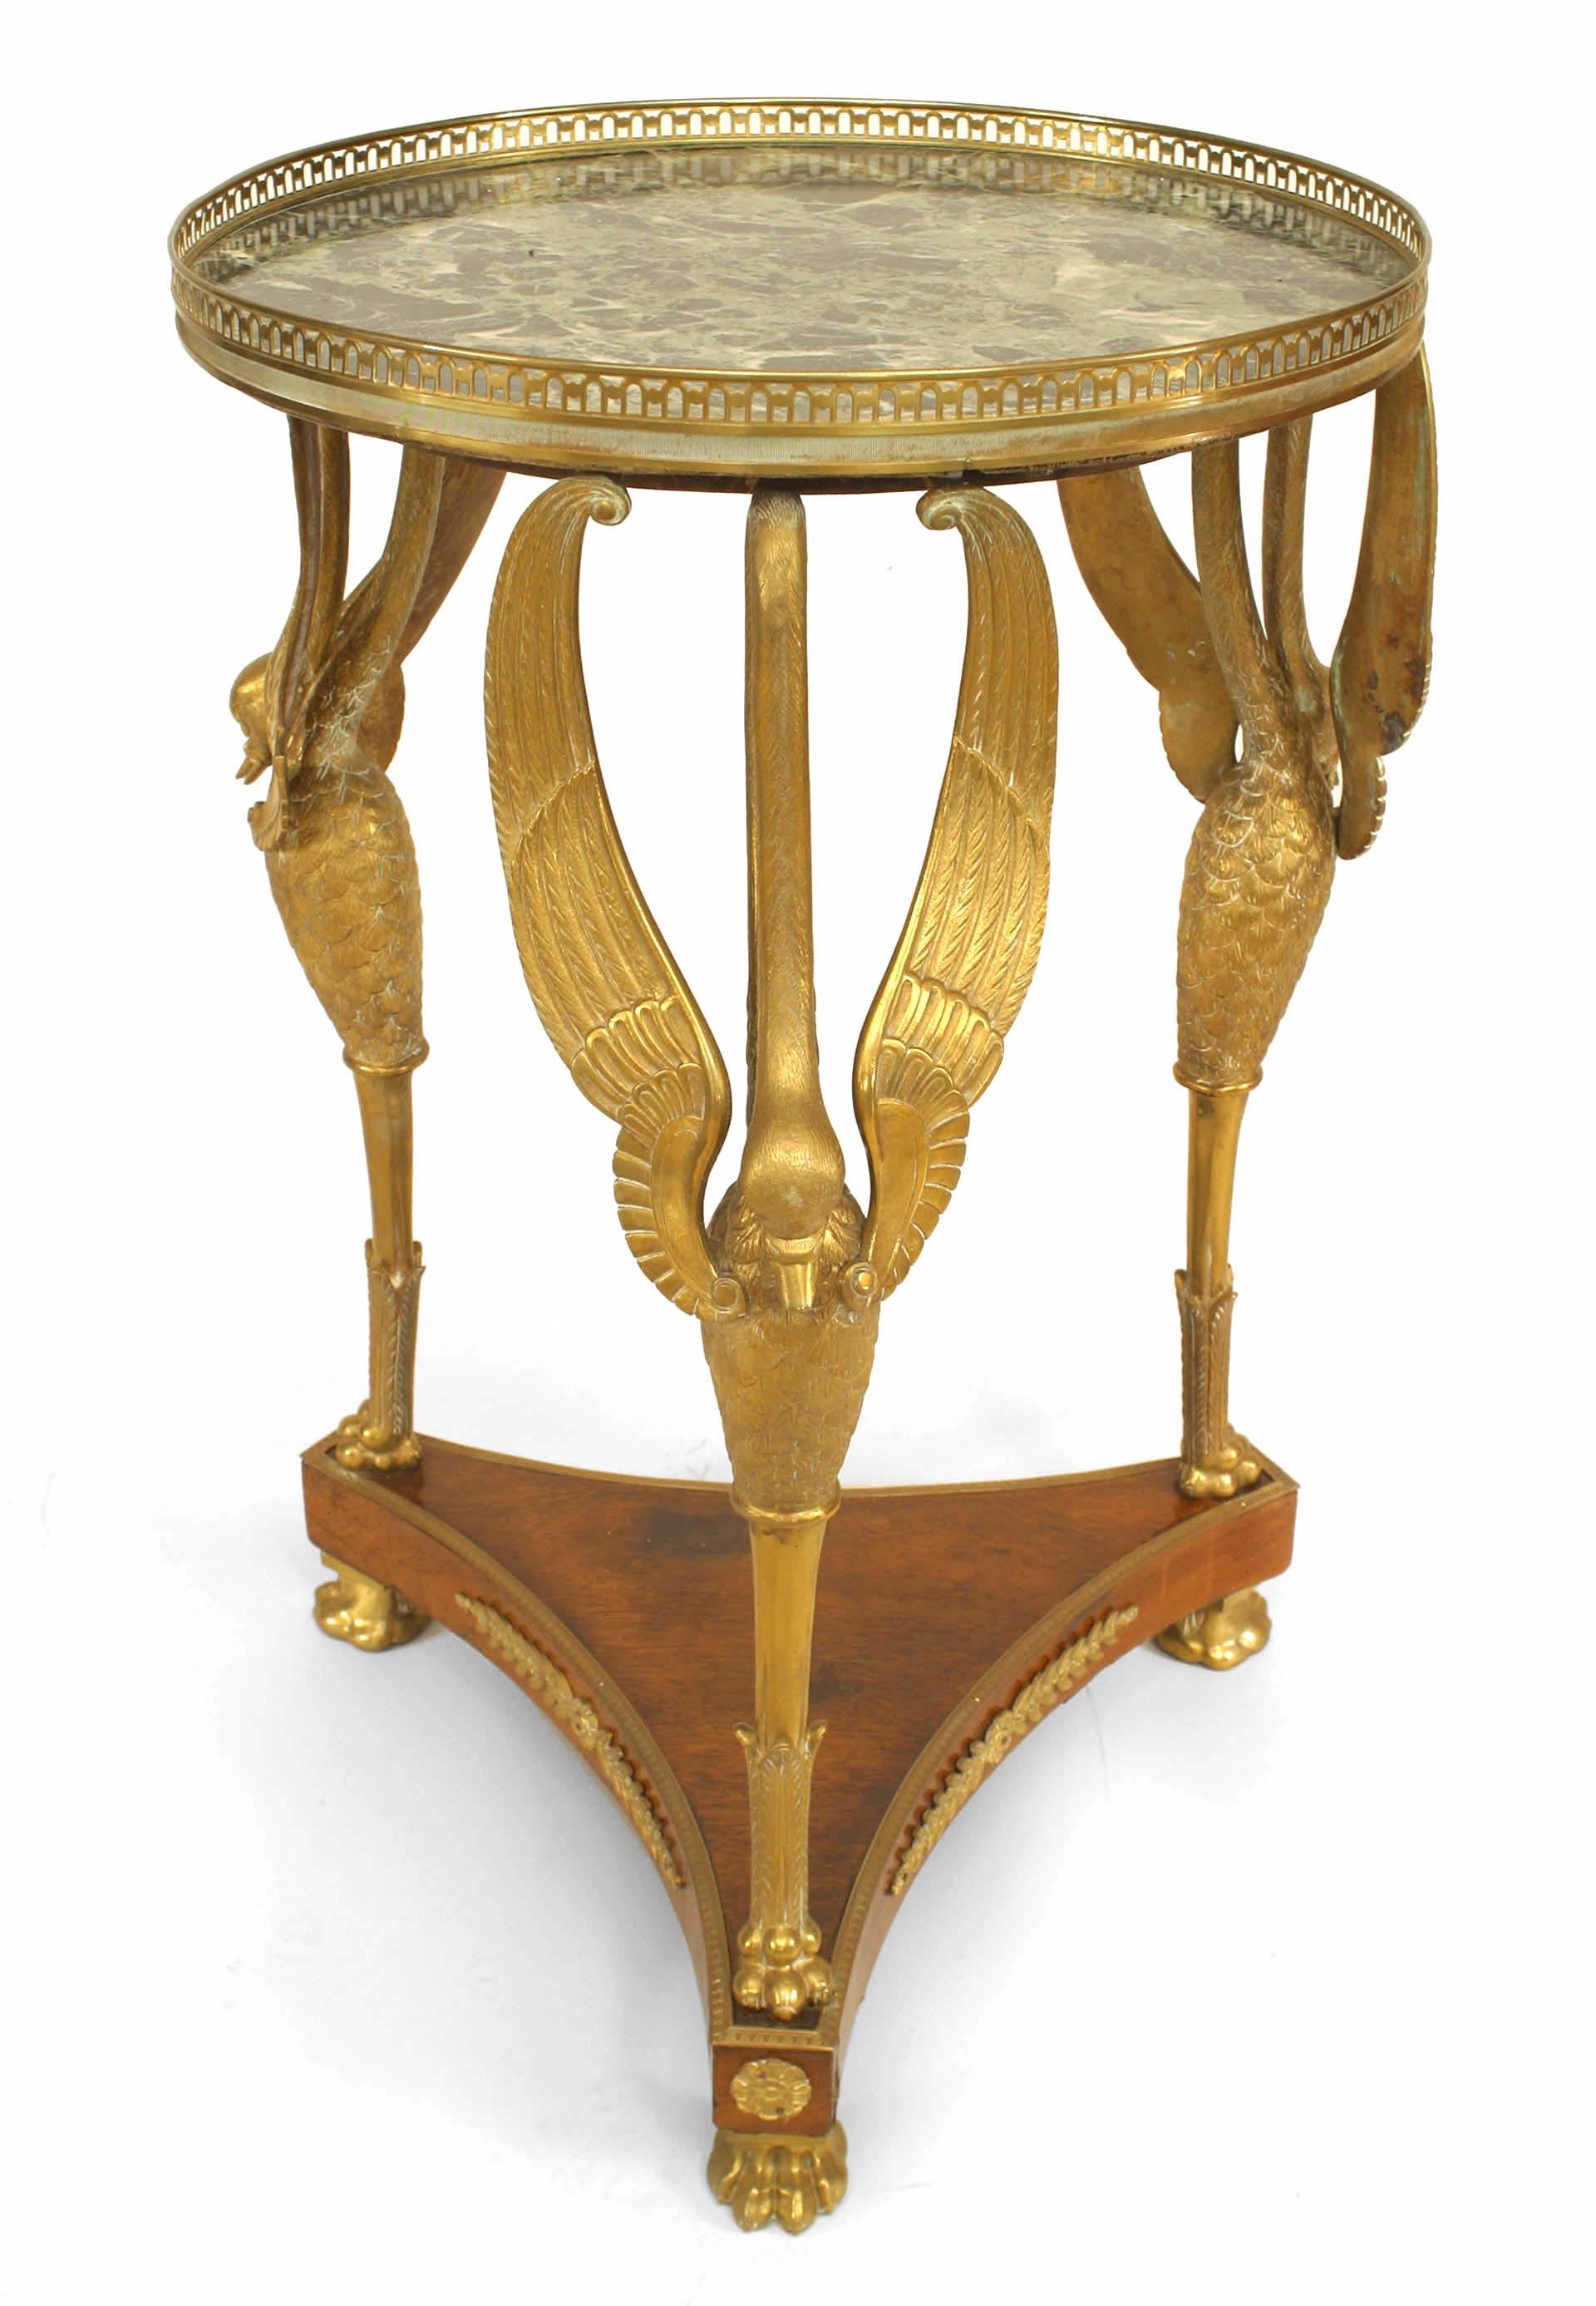 French Empire-style (19th Century) mahogany and bronze gu√©ridon table on triple swan leg platform with stretcher, gallery, and green marble top.
